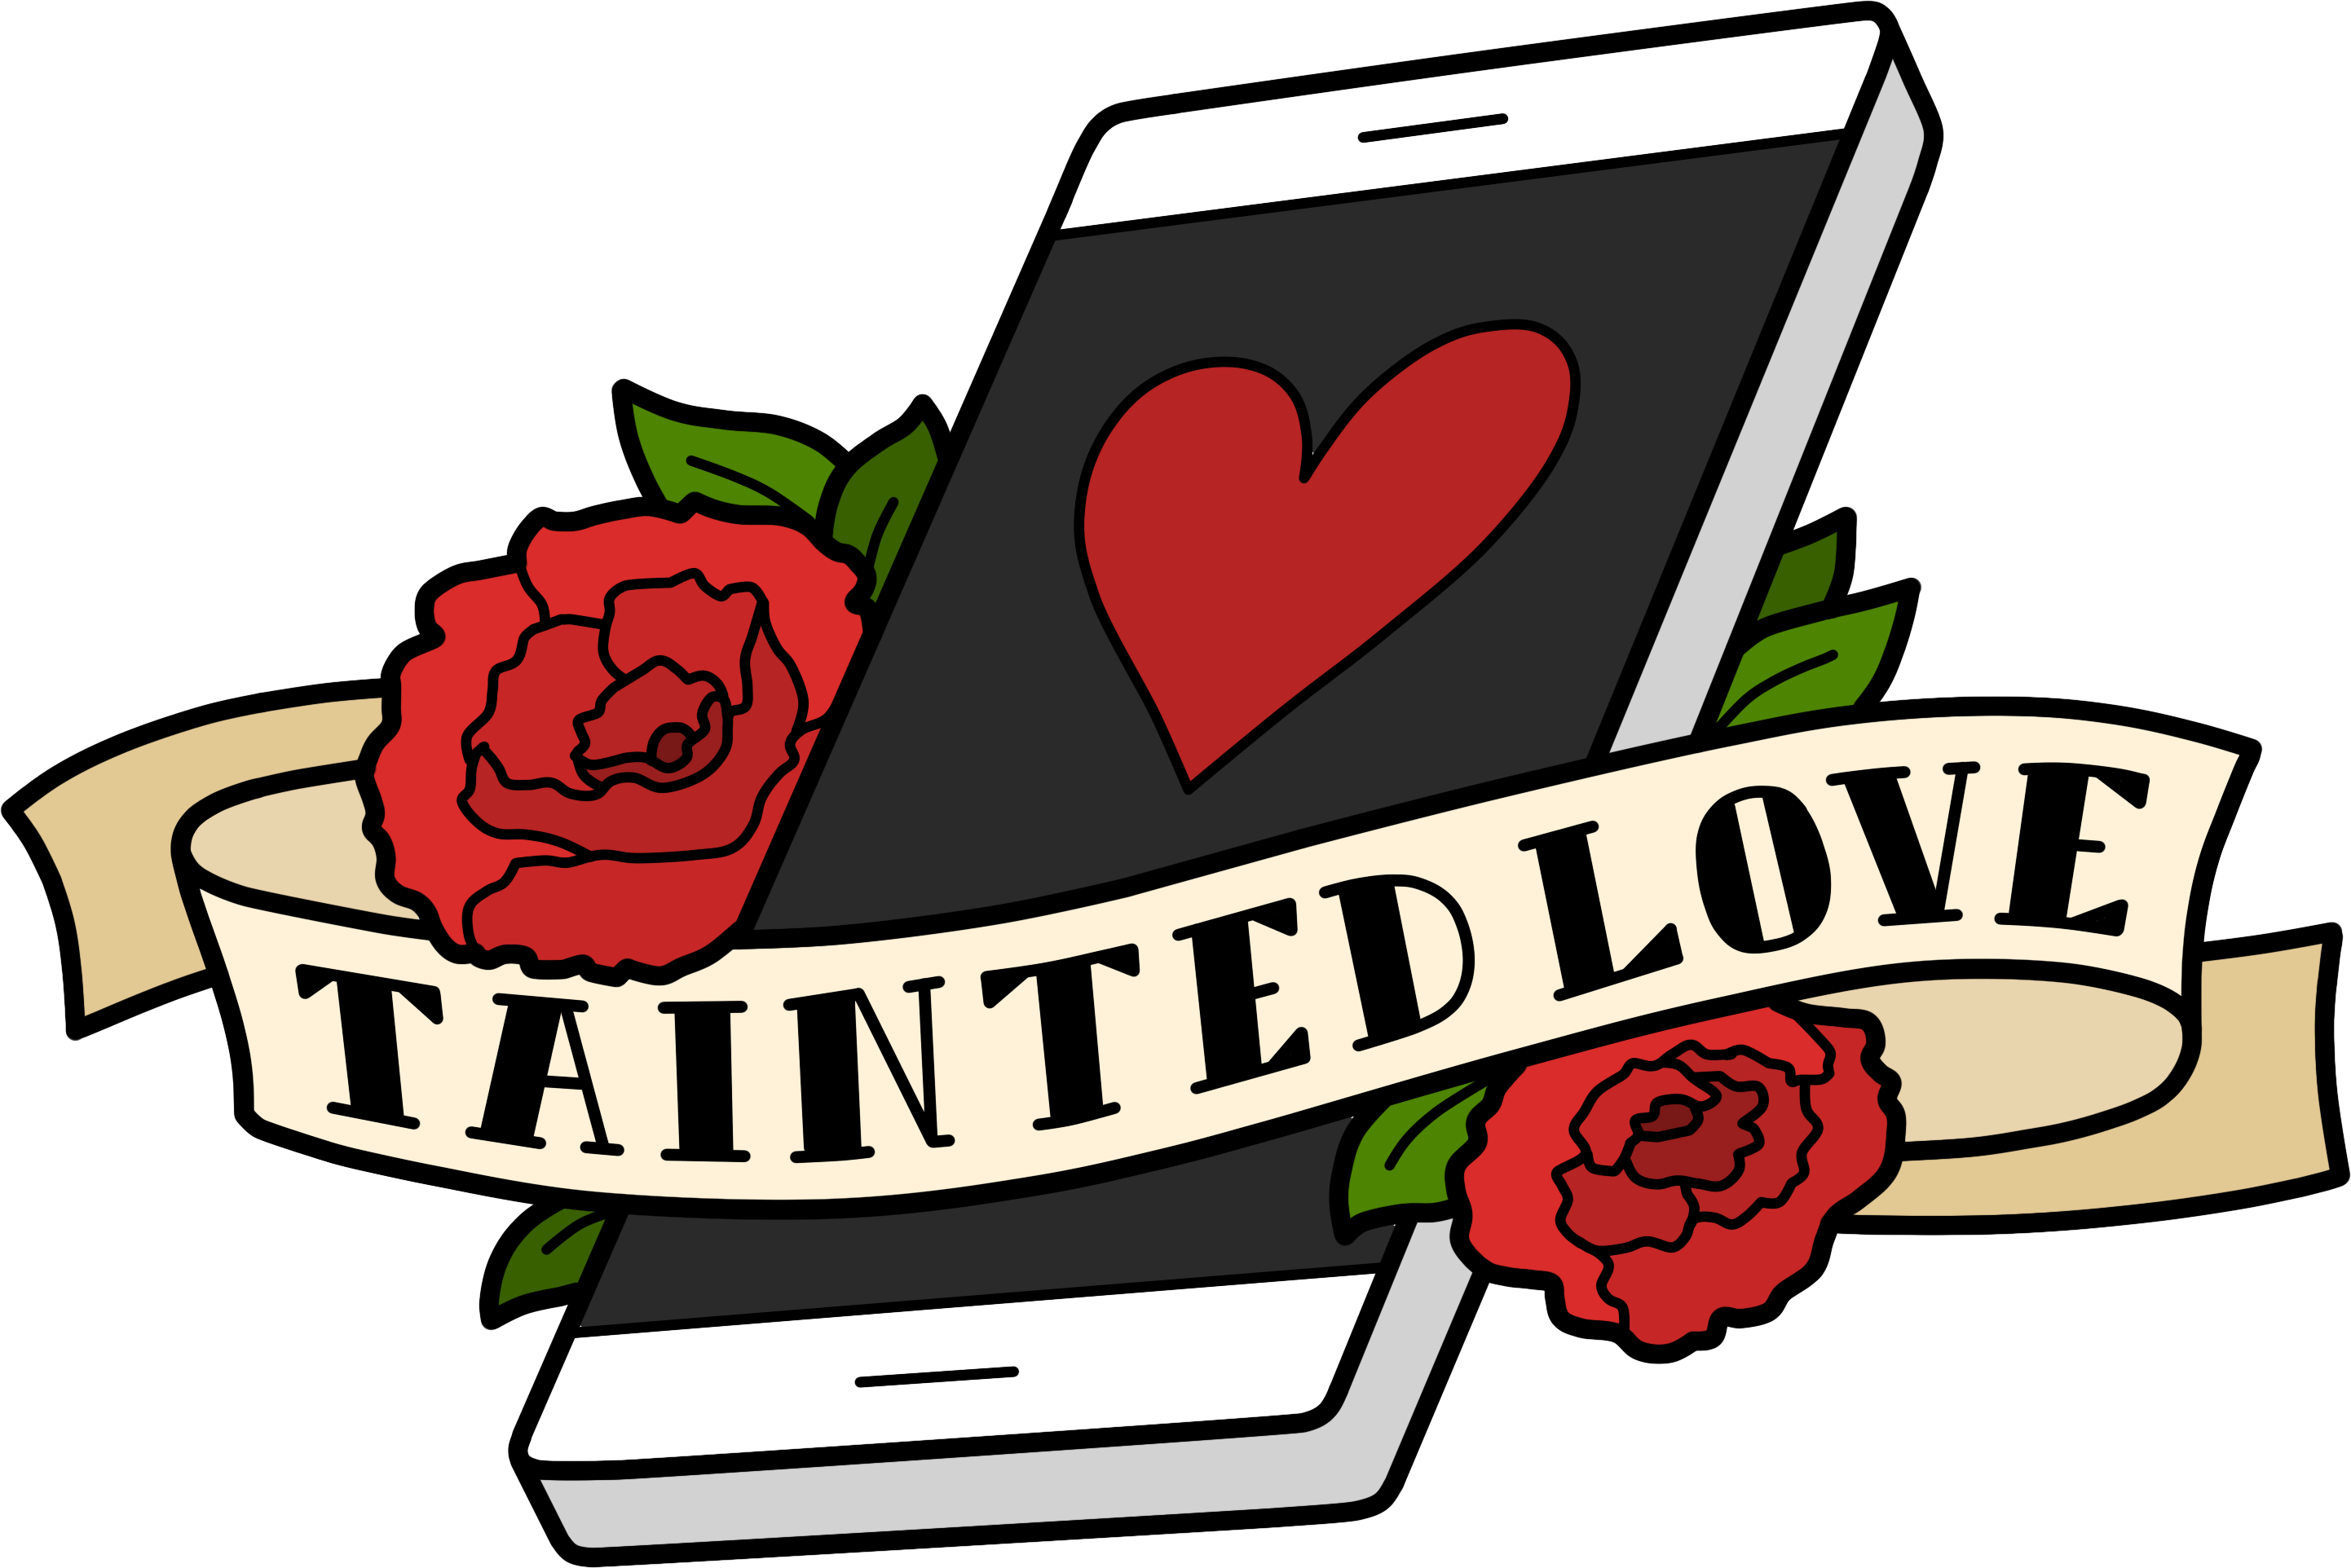 Tainted Logo - Tainted Love | Knowledge Integration eXhibition | University of Waterloo